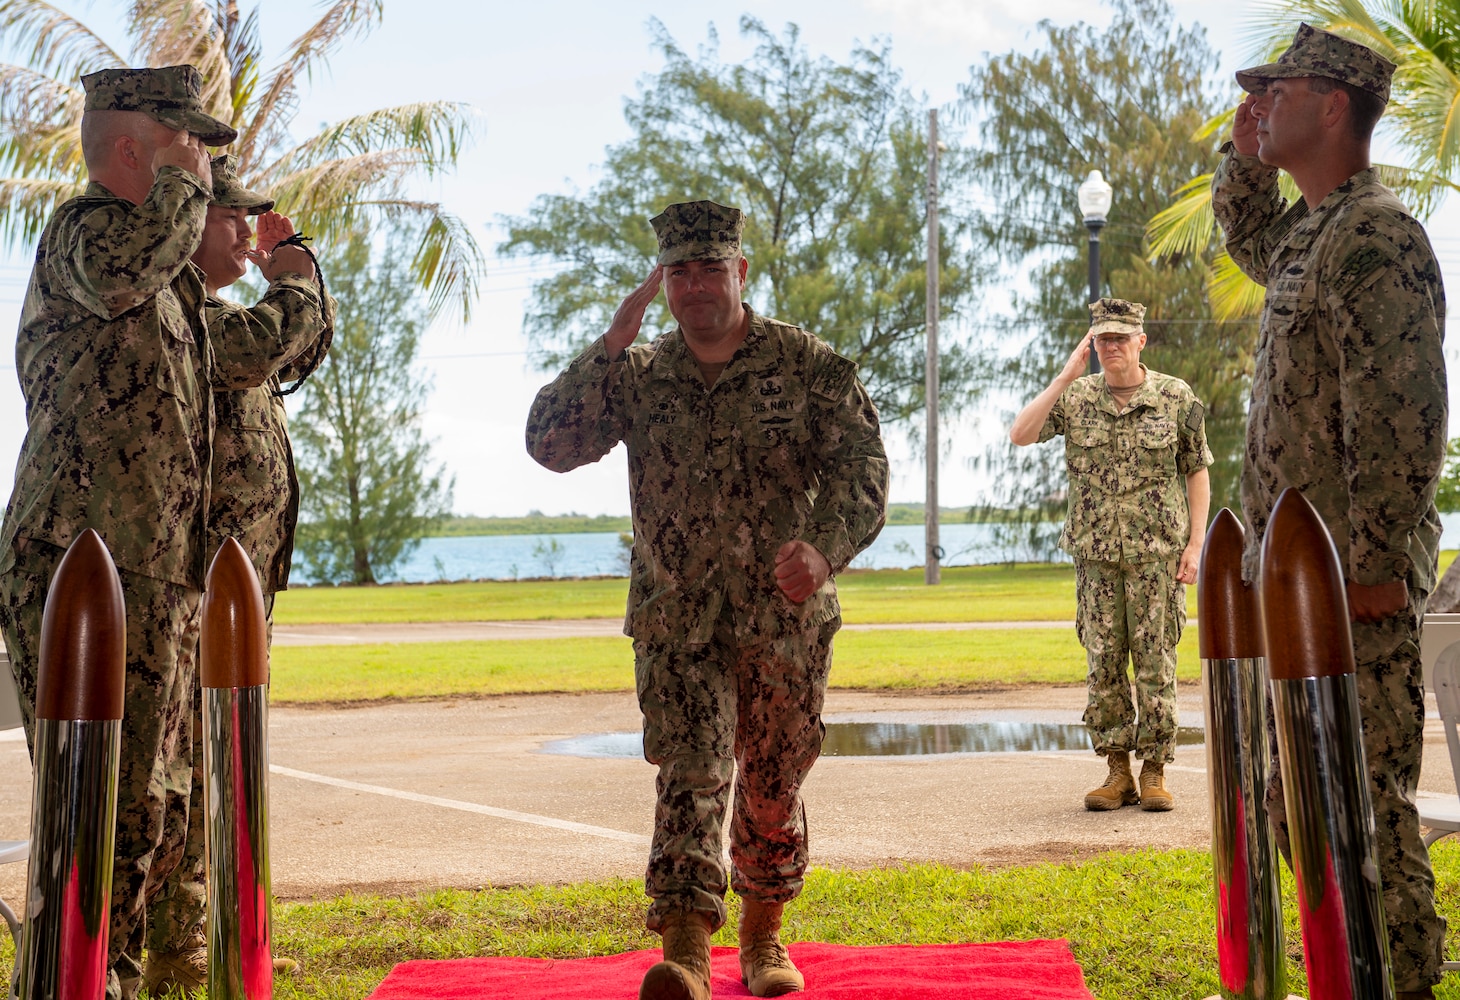 PITI, Guam (June 17, 2022) Capt. Gareth Healy receives honors from side boys during the Commander, Task Force 75 change of command ceremony. Healy relinquished command as Commodore, CTF 75 to Capt. Shaun Lieb. CTF 75 provides expeditionary combat capabilities in the U.S. Navy's 7th Fleet area of operations and is capable of providing the fleet with diverse expeditionary warfighting capabilities that are combat-ready and able to deploy anywhere in U.S. 7th Fleet in response to any contingency. The Navy's expeditionary forces exist first and foremost to support the fleet's warfighting operations and are the Navy's sea-to-shore interface. (U.S. Navy photo by Mass Communication Specialist 1st Class Billy Ho)